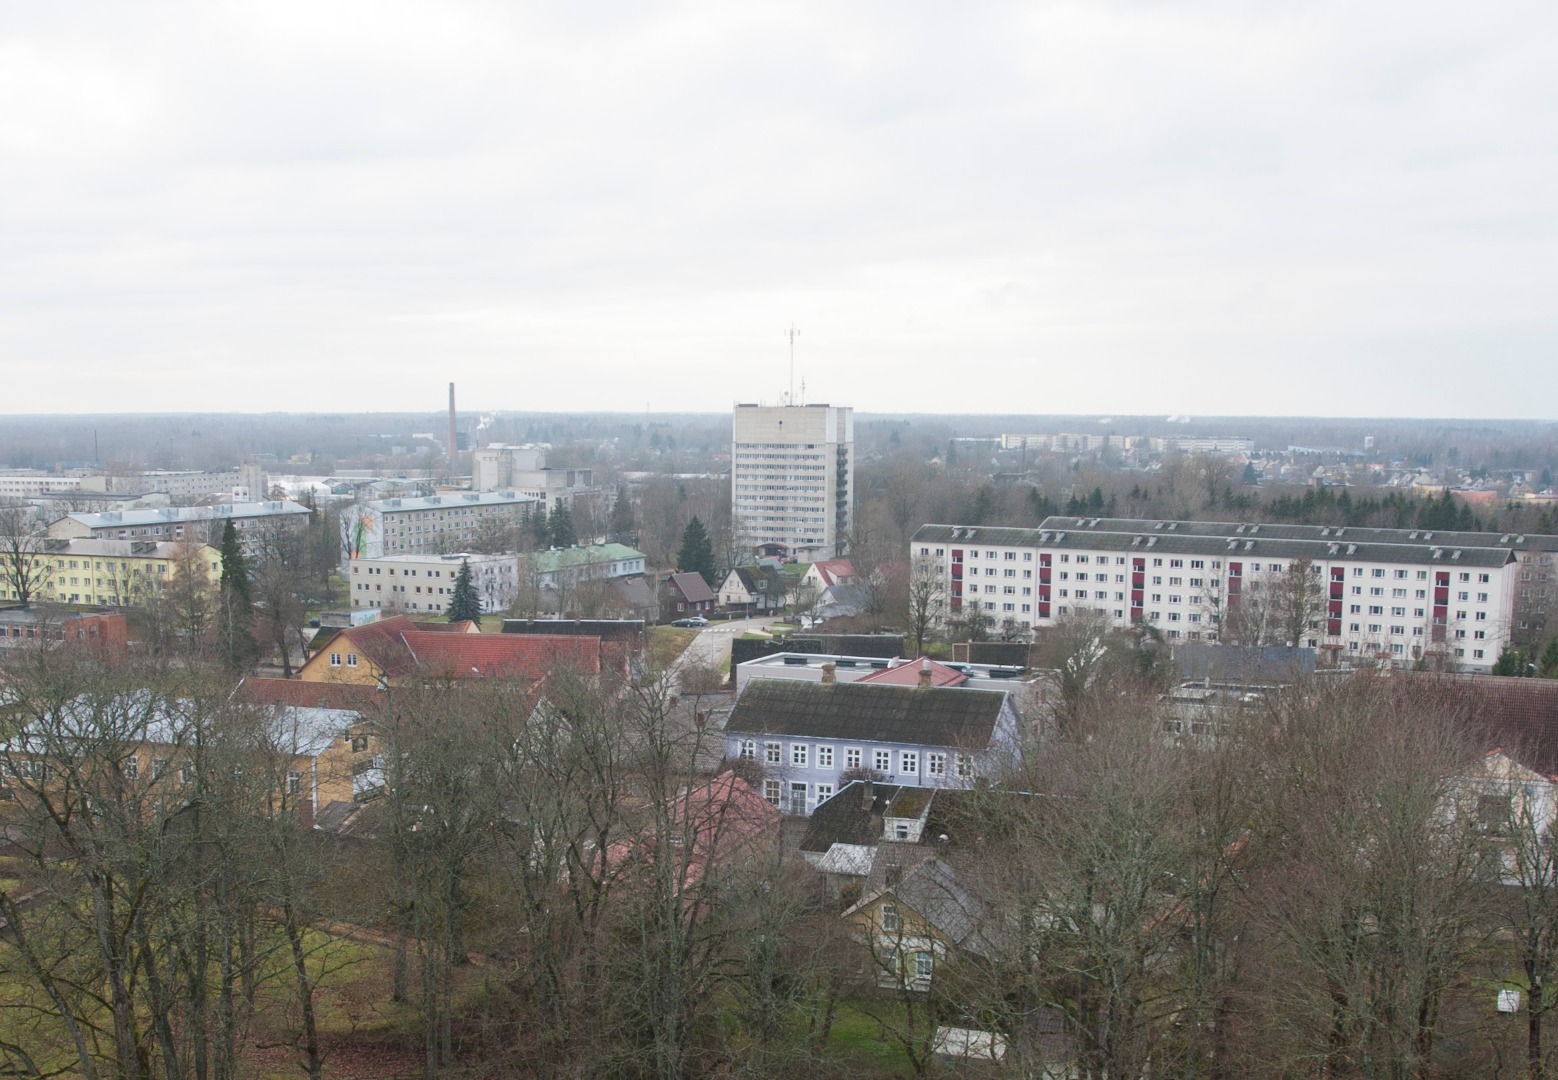 General view of Paide rephoto